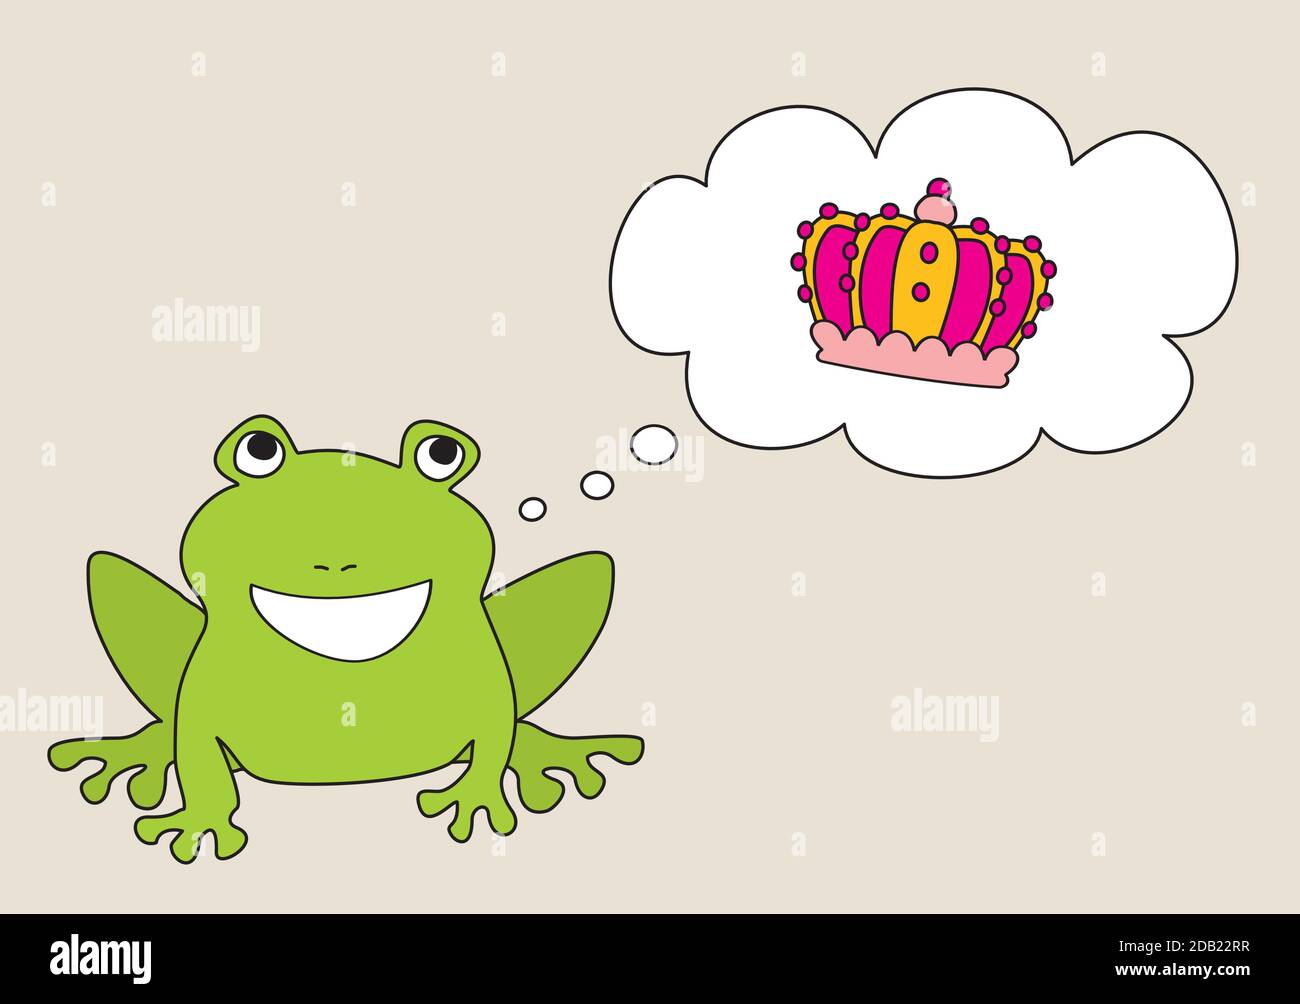 Prince or princess frog dreaming about crown Stock Vector